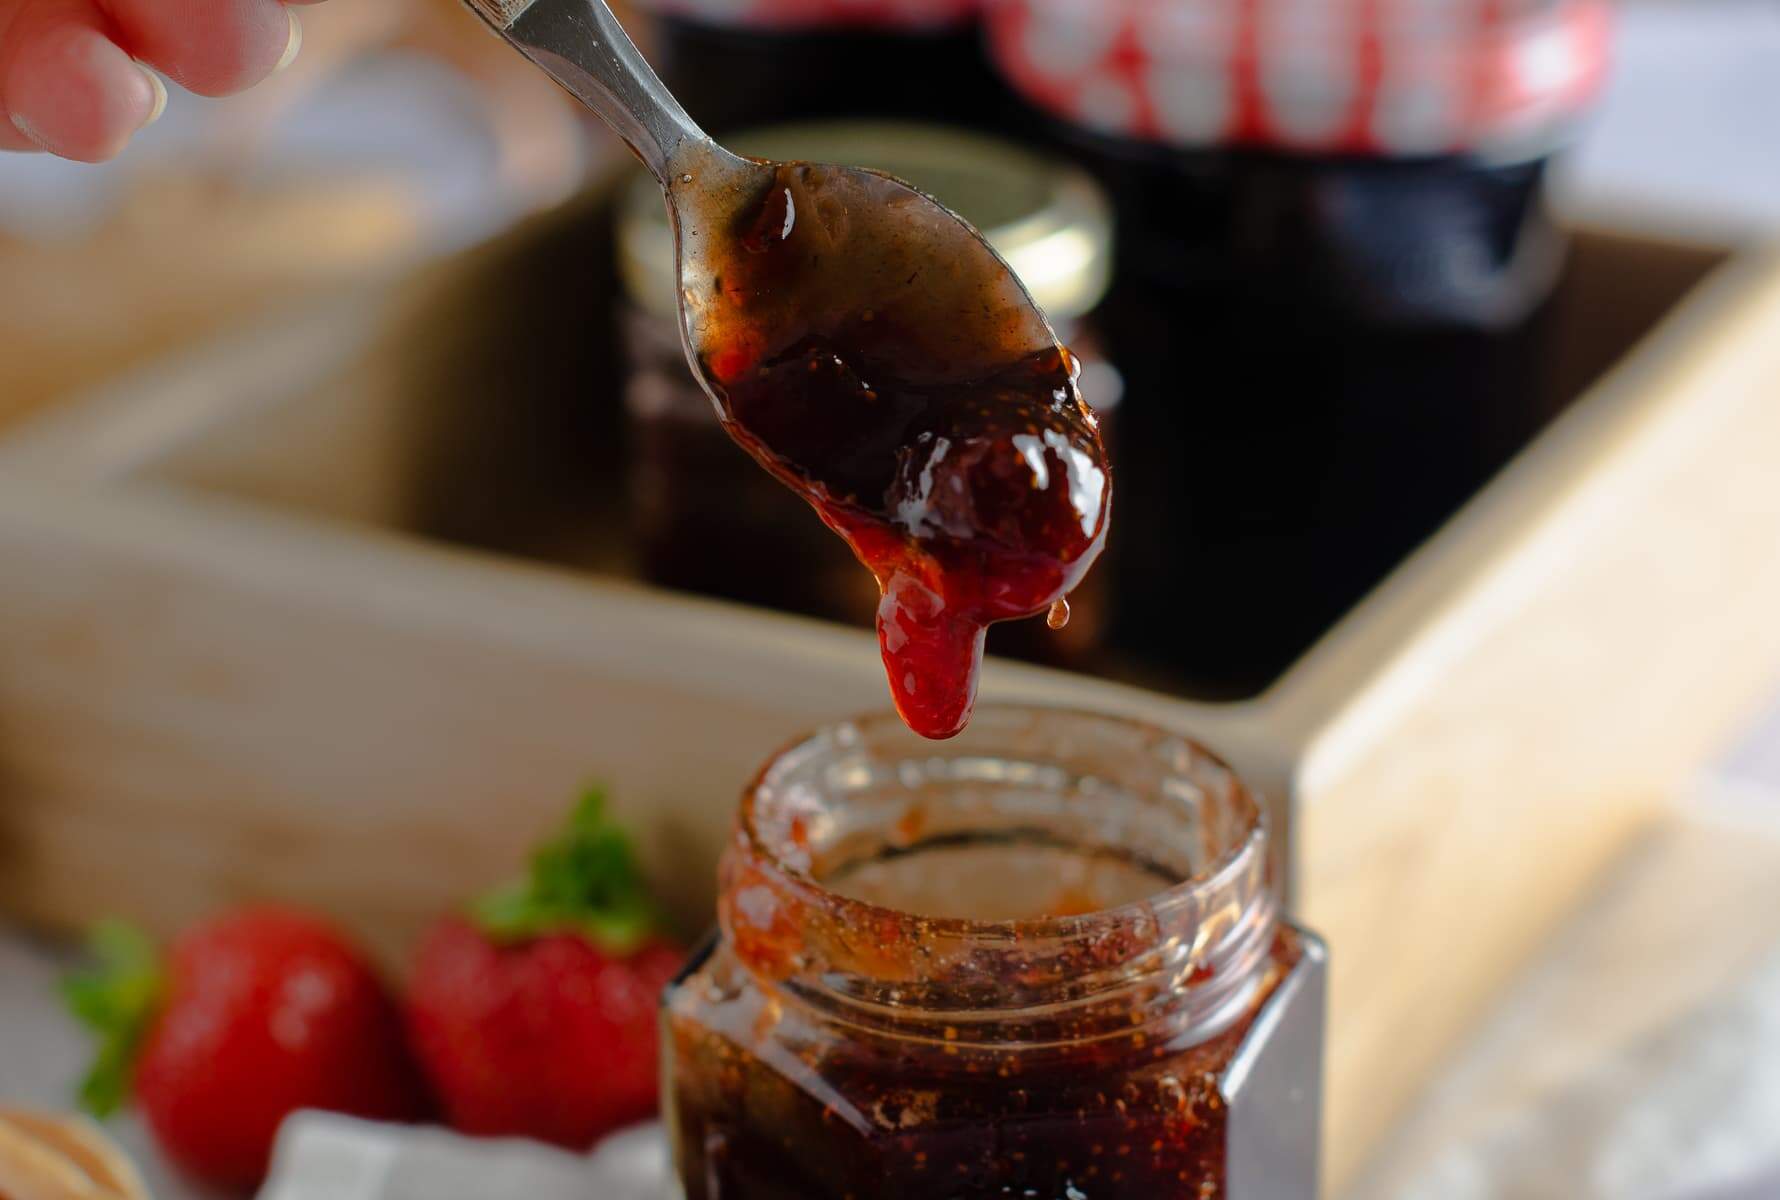 Homemade jam dropping from a spoon back into the jar.